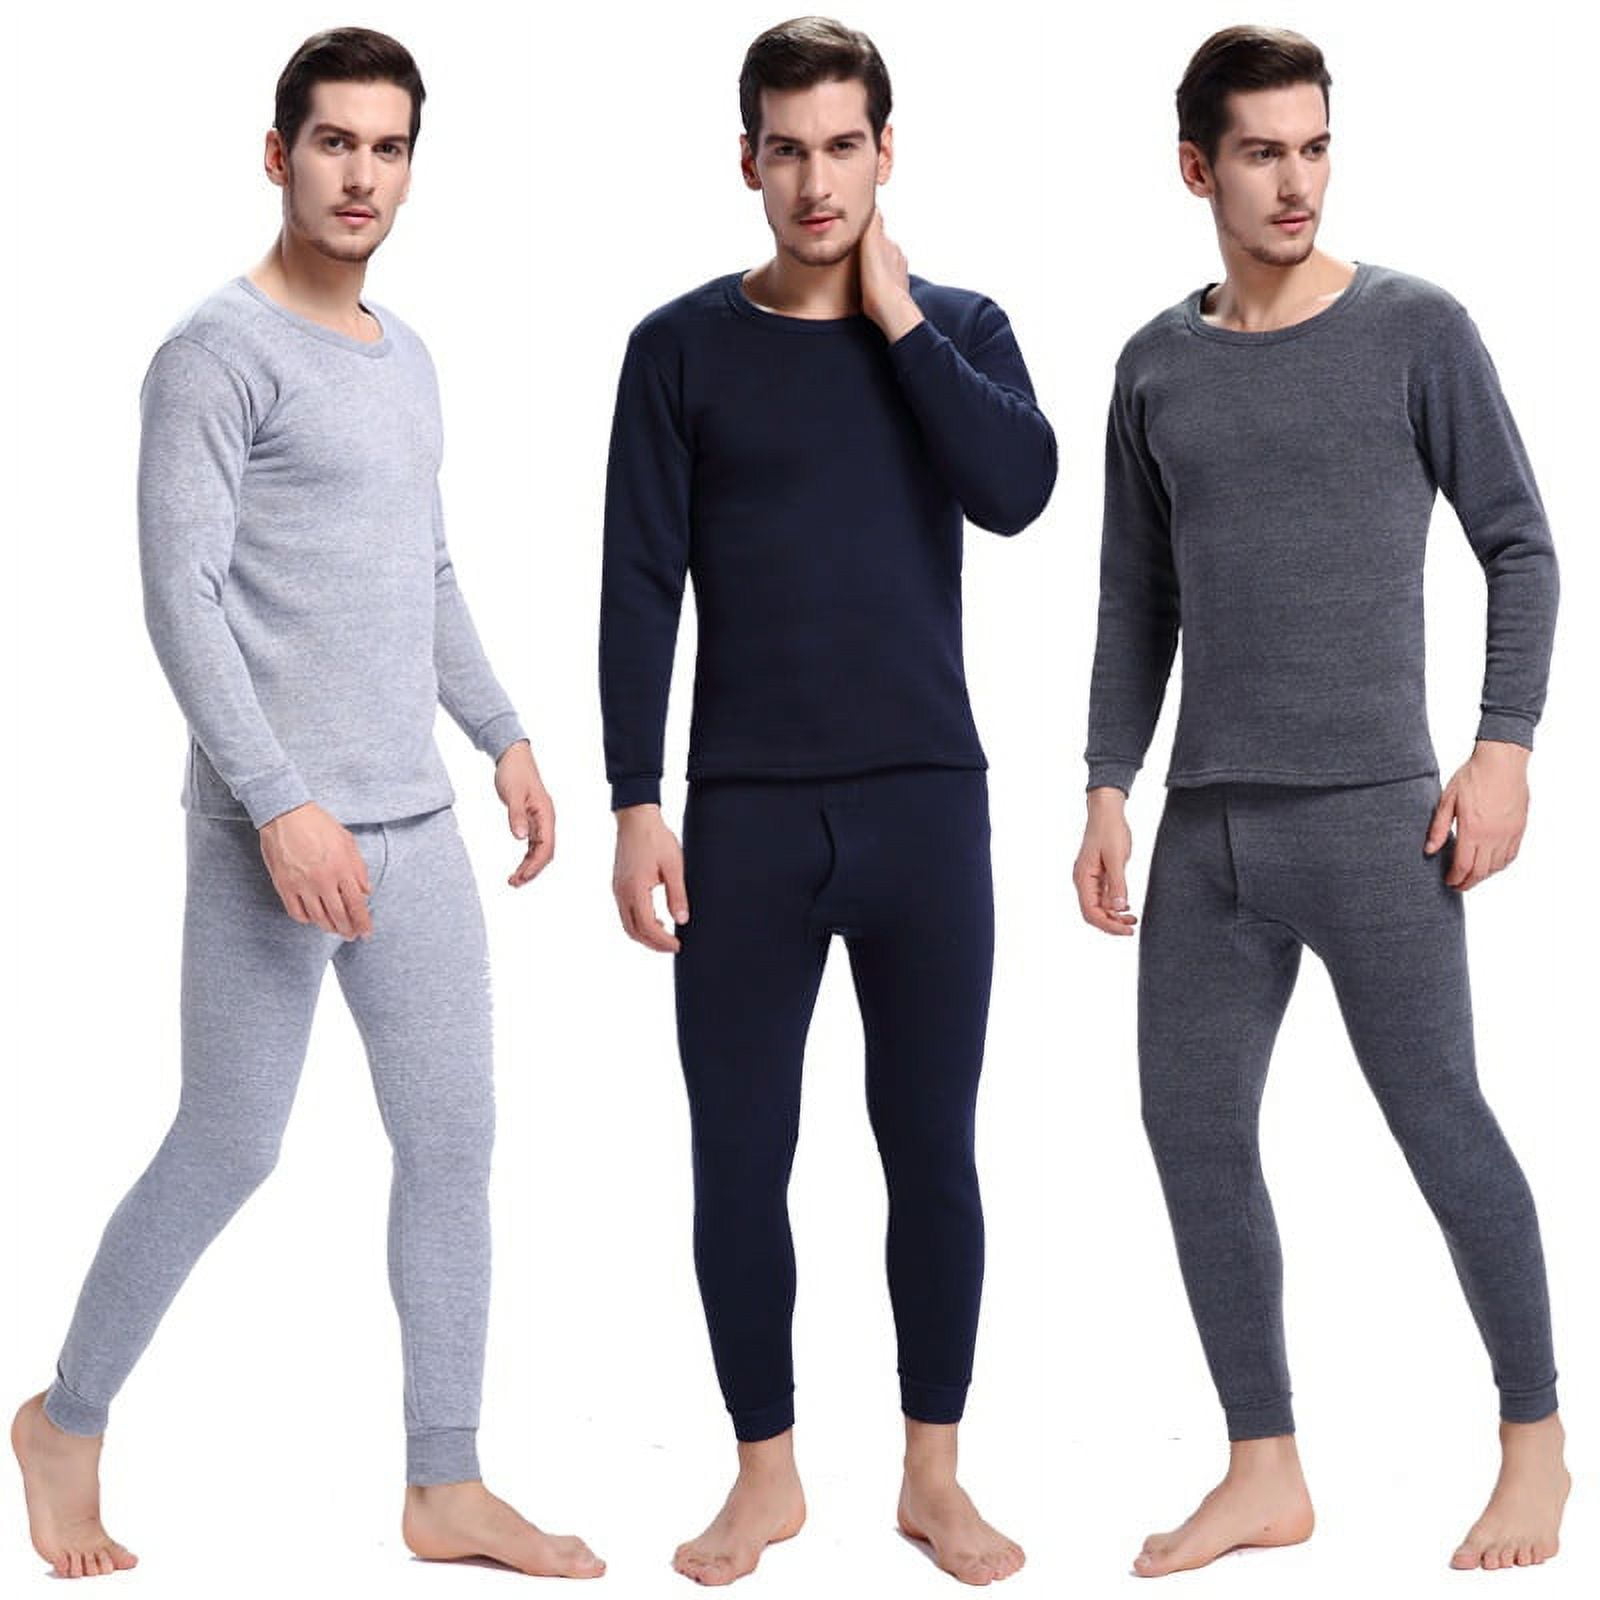 Mens Winter Thermal Underwear Sets Thick Warm Undershirts Long